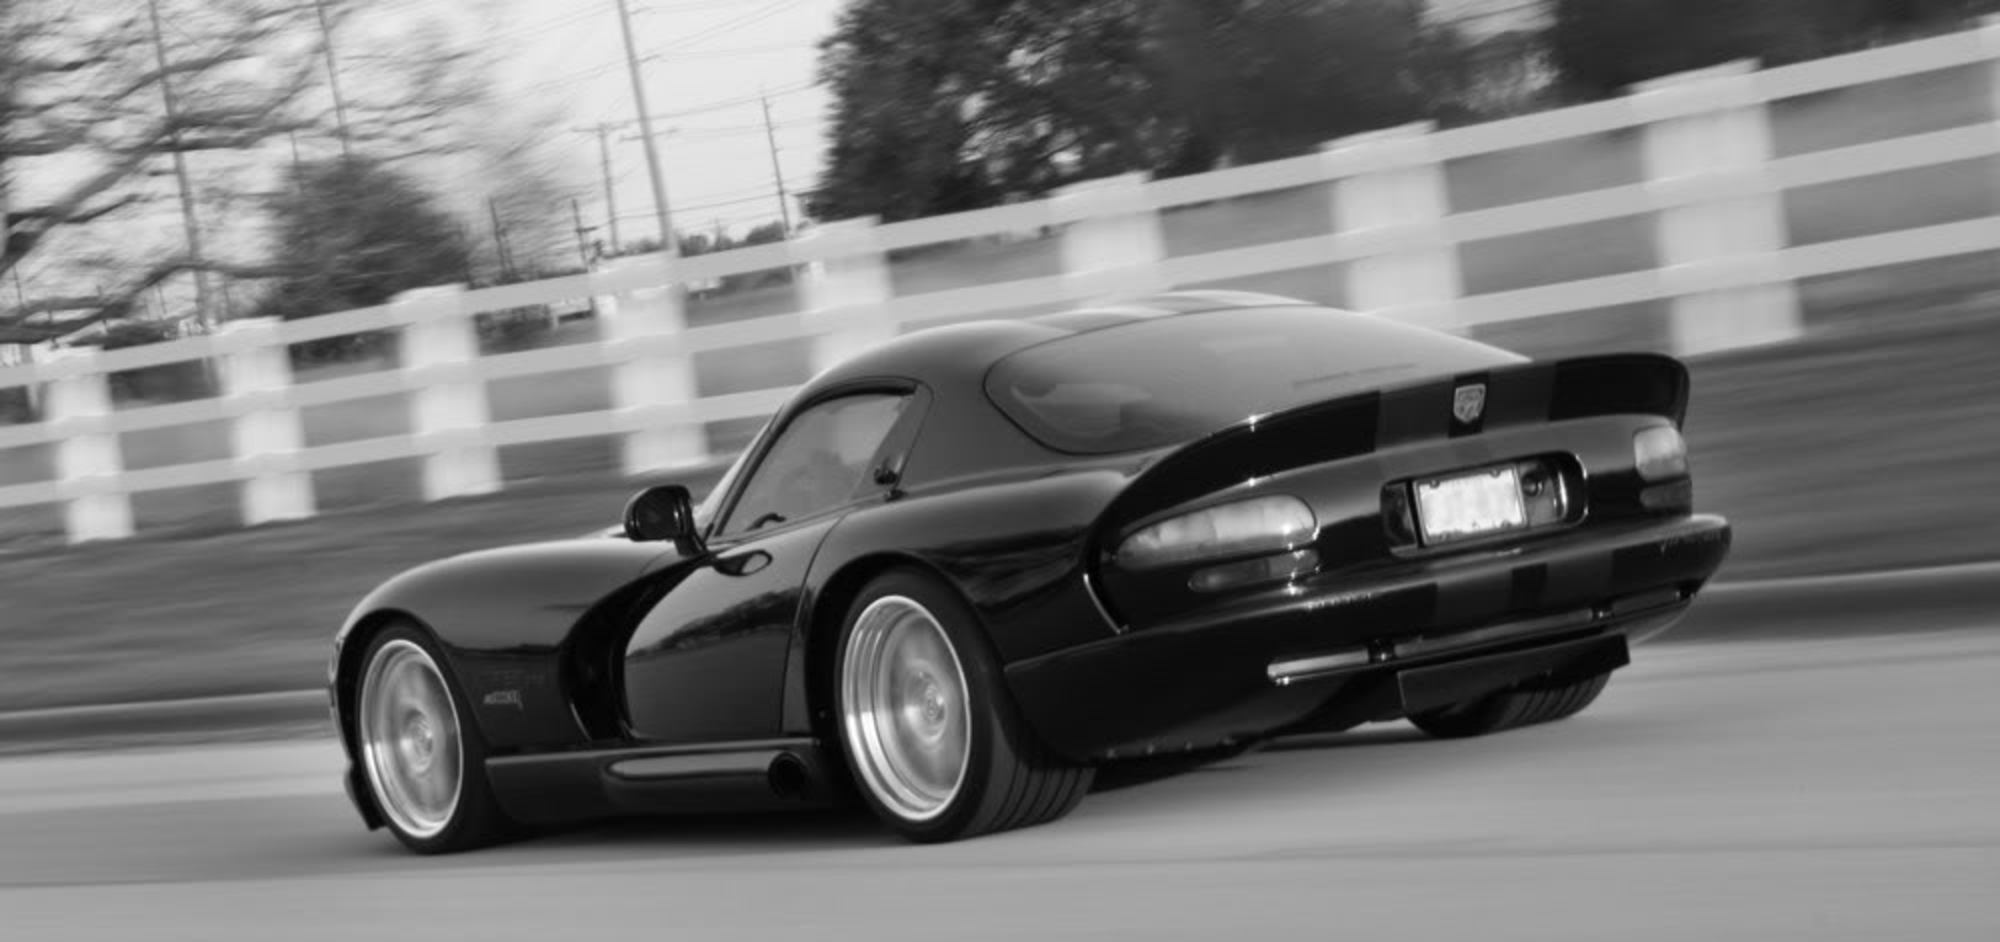 1999 Dodge Viper GTS ACR **Supercharged** Trade for C6Z maybe?